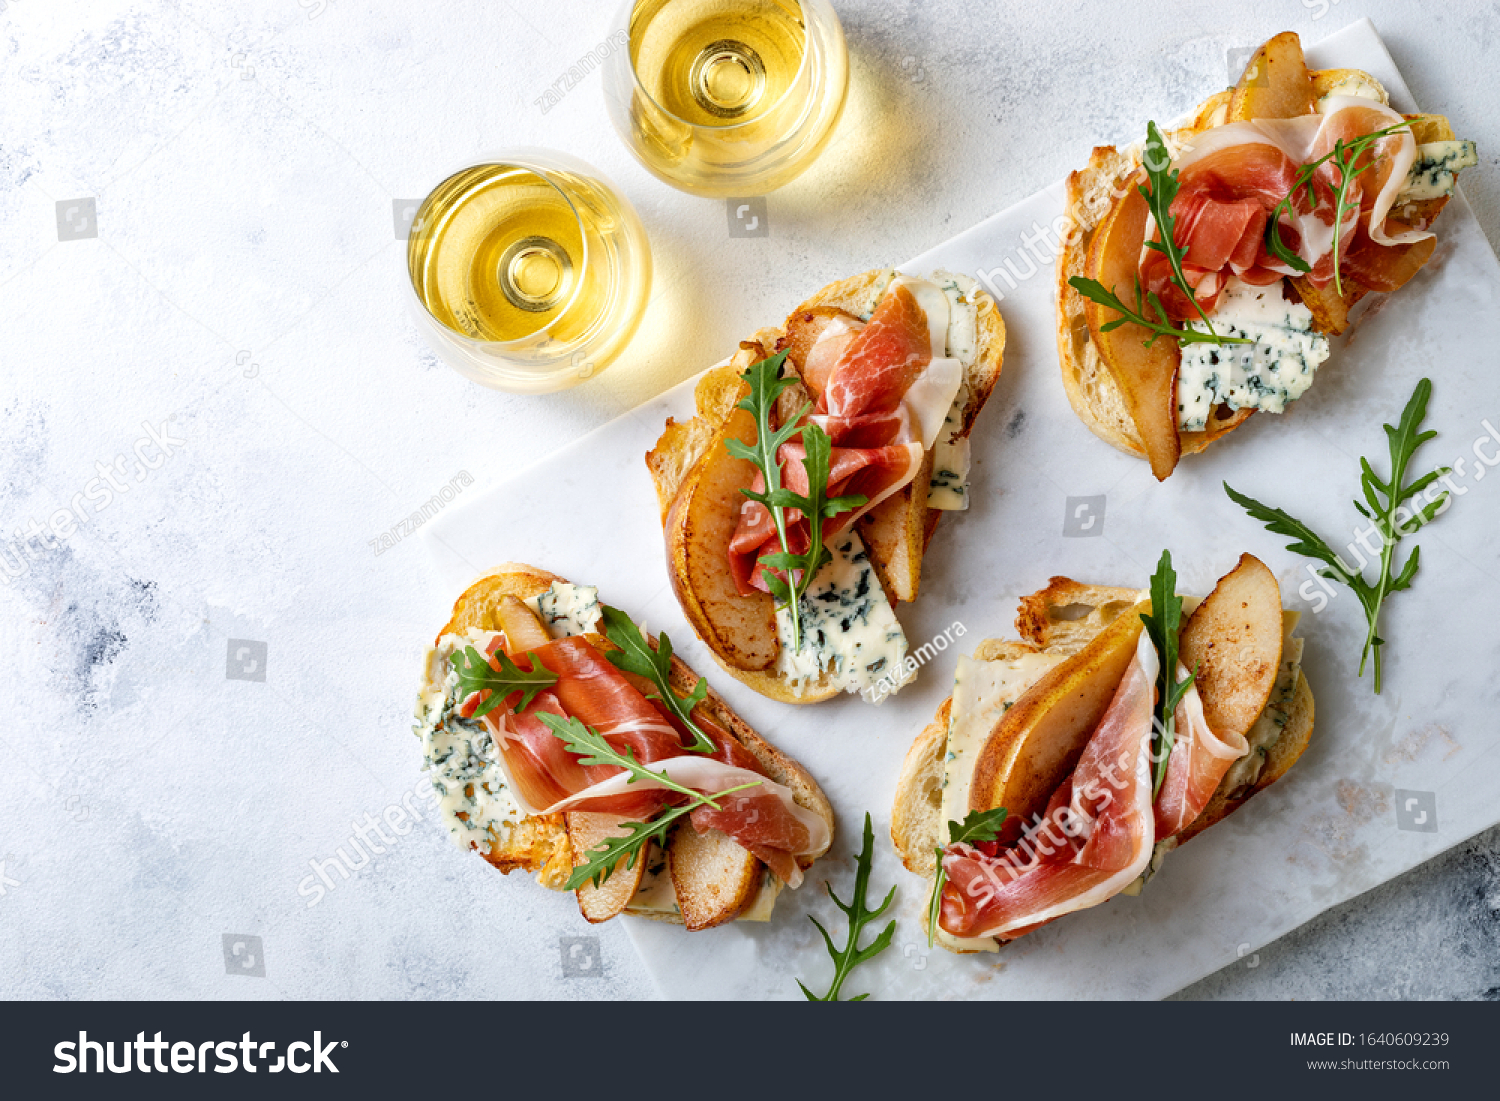 Appetizer crostini, tapas, open faced sandwiches with pear, prosciutto, arugula and blue cheese on white marble board. Delicious snack, appetizers #1640609239